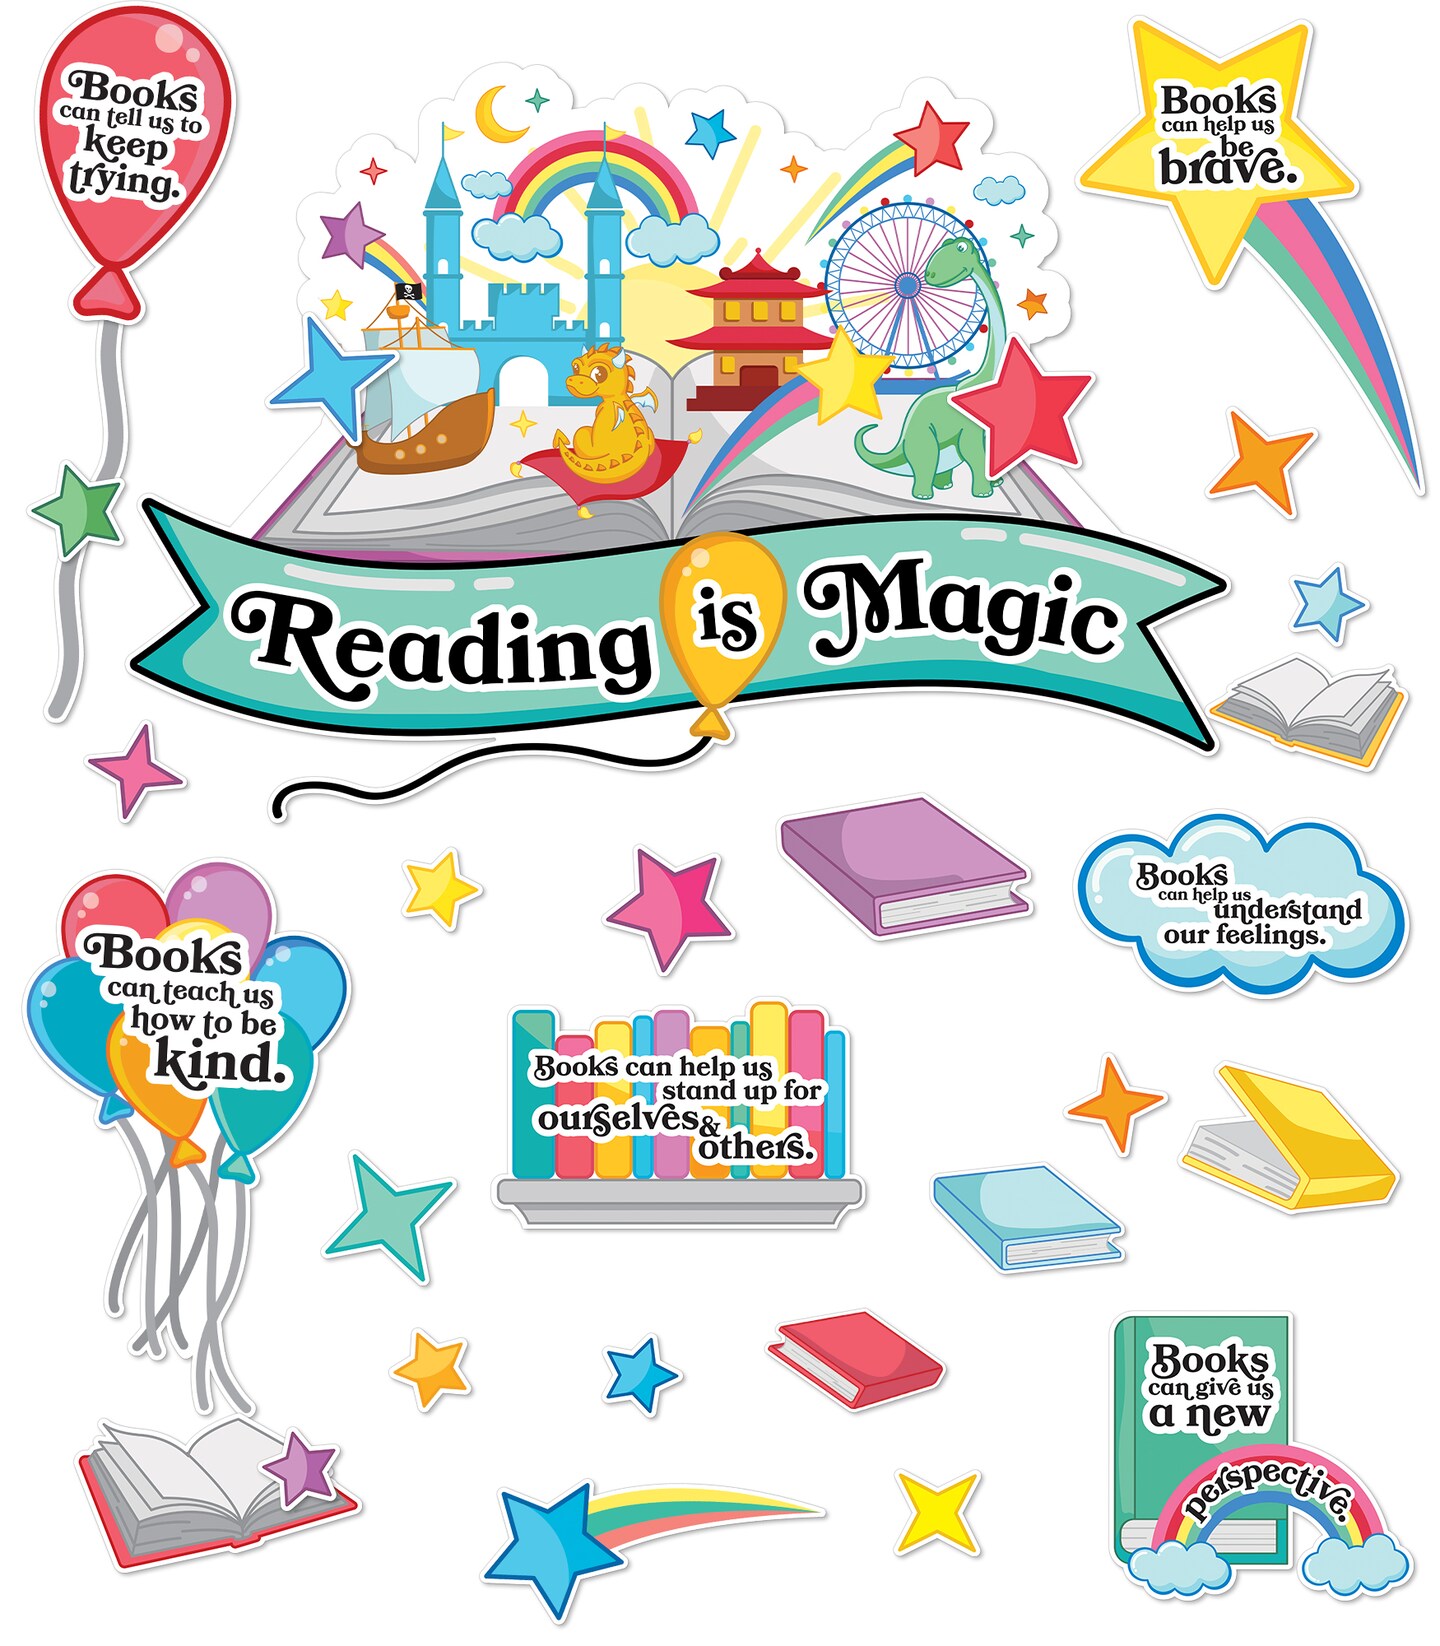 Carson Dellosa Reading is Magic Bulletin Board Set&#x2014;Motivational Posters, Balloons, Books, Stars, and Rainbow Decorations and Cutouts, Homeschool or Classroom D&#xE9;cor (53 pc)